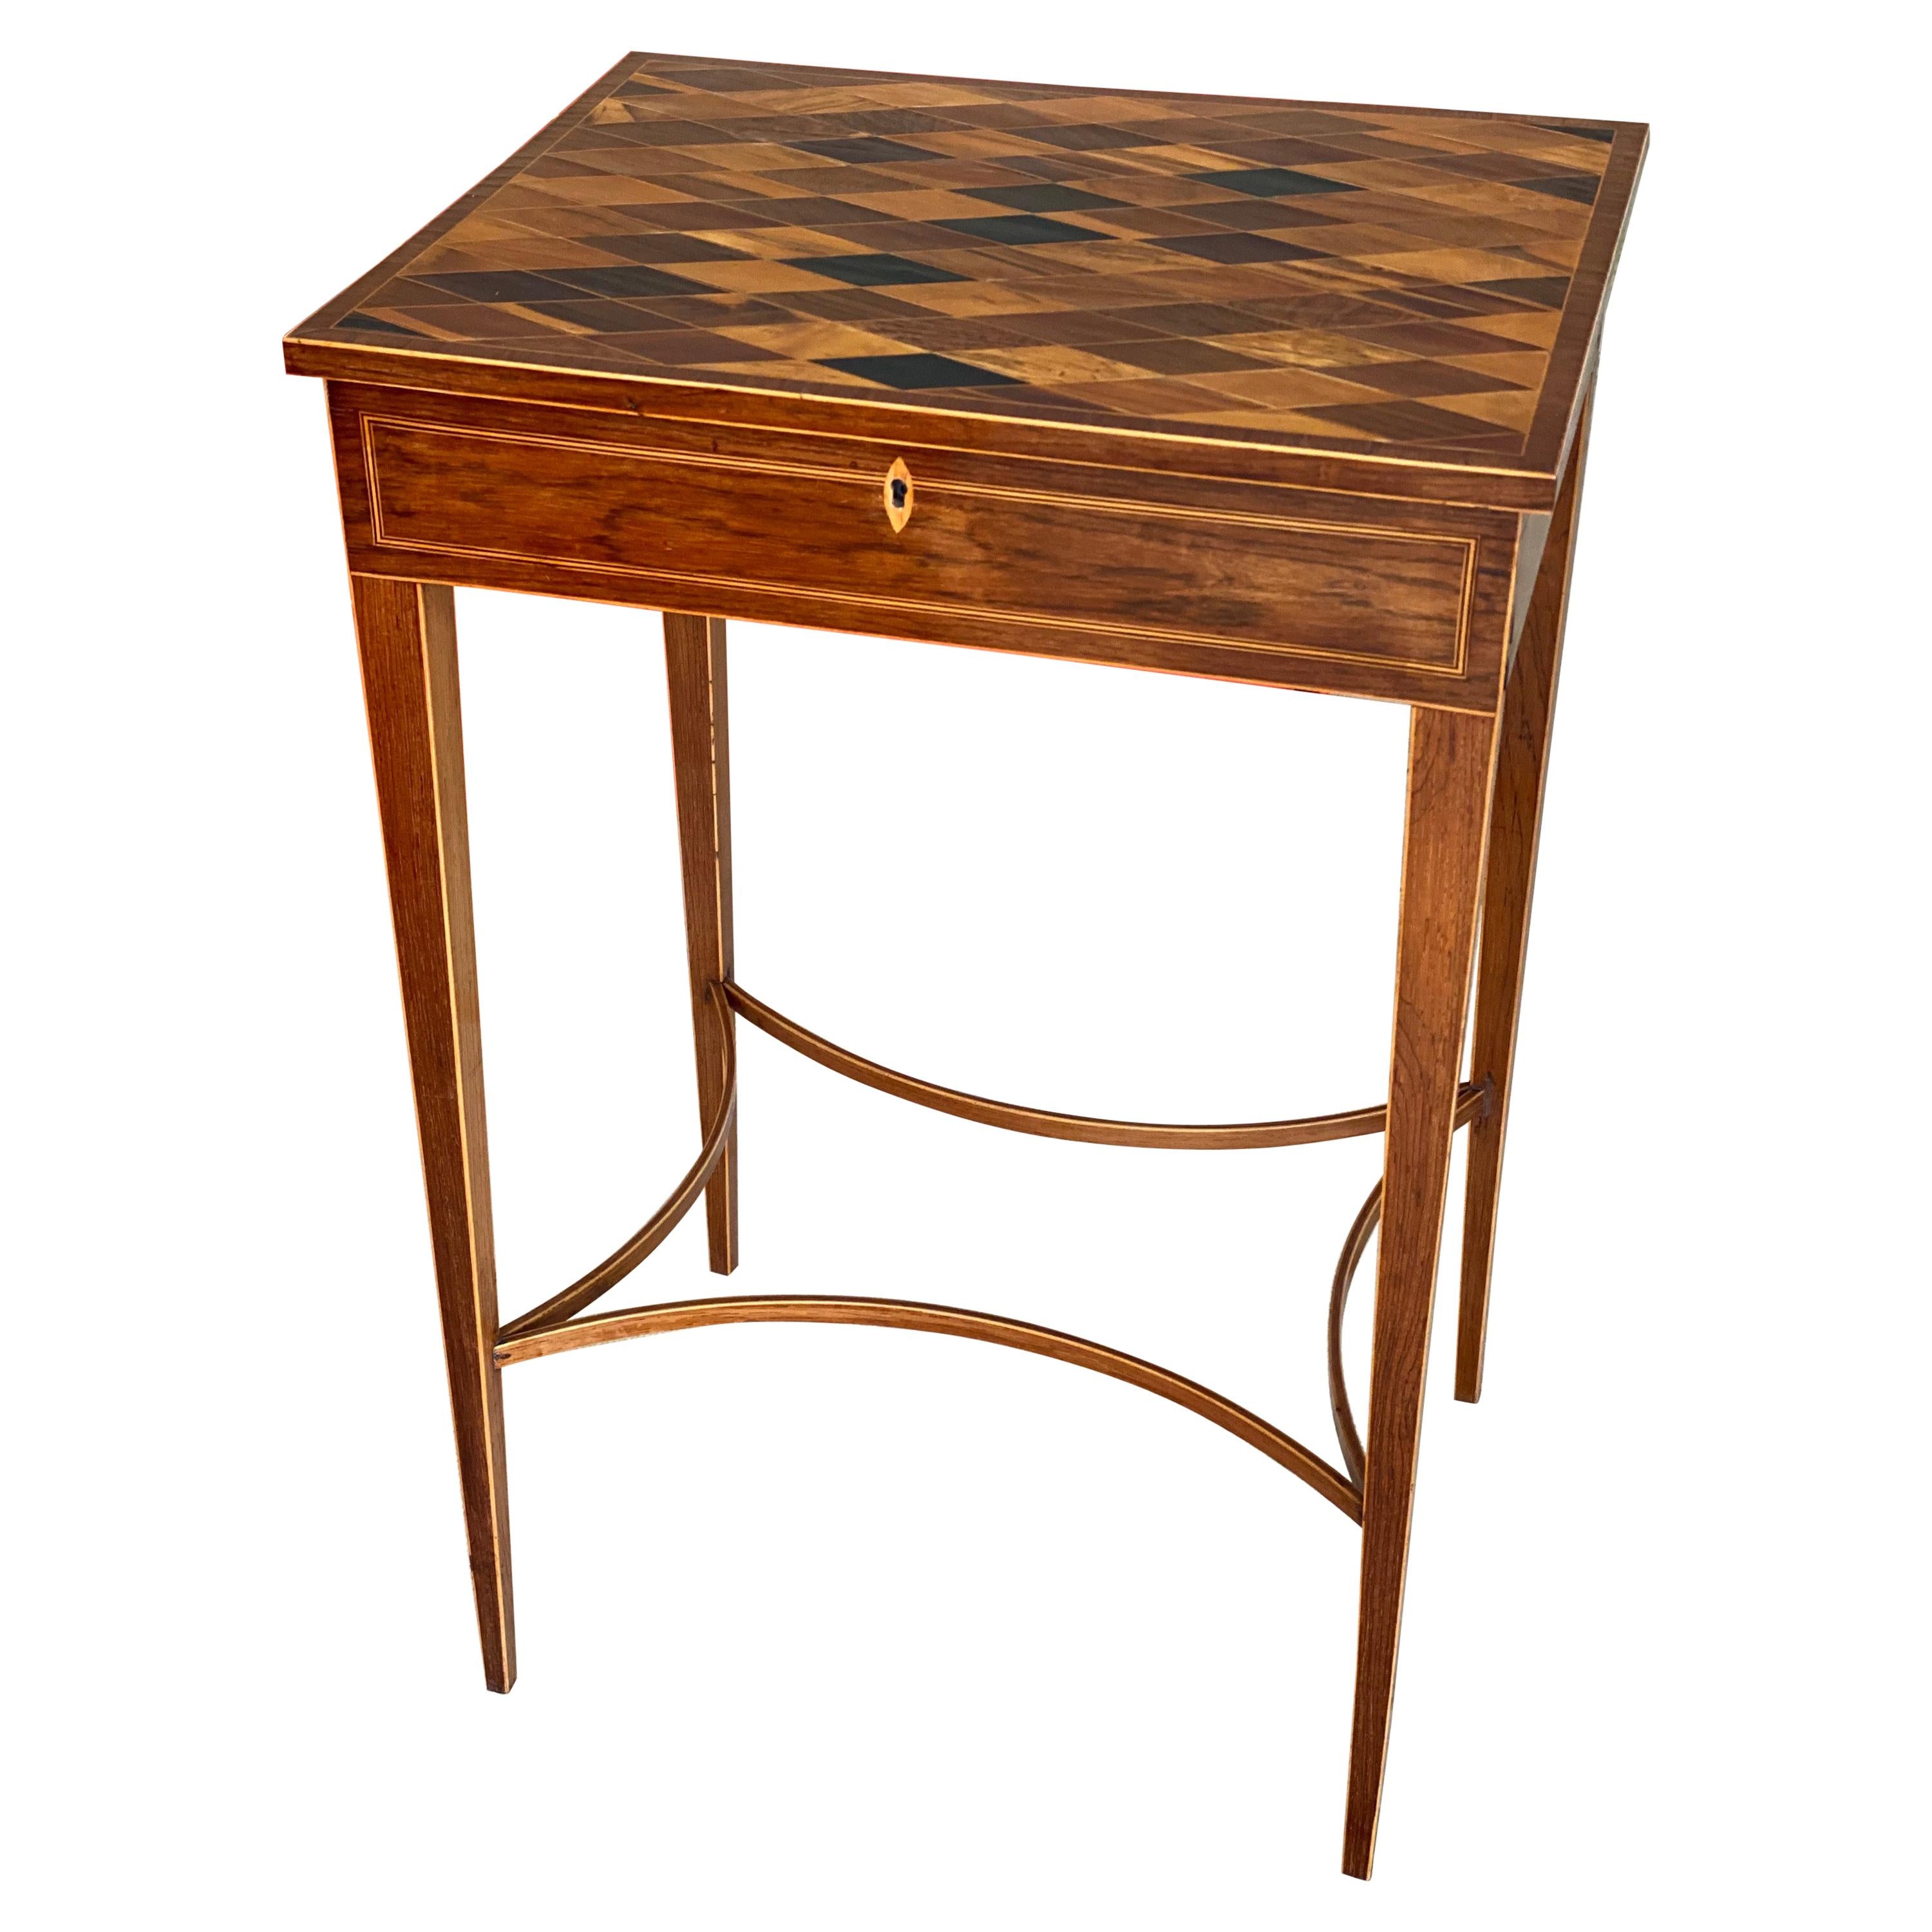 Unusual George III Inlaid Rosewood and Specimen Wood Parquetry Work Table